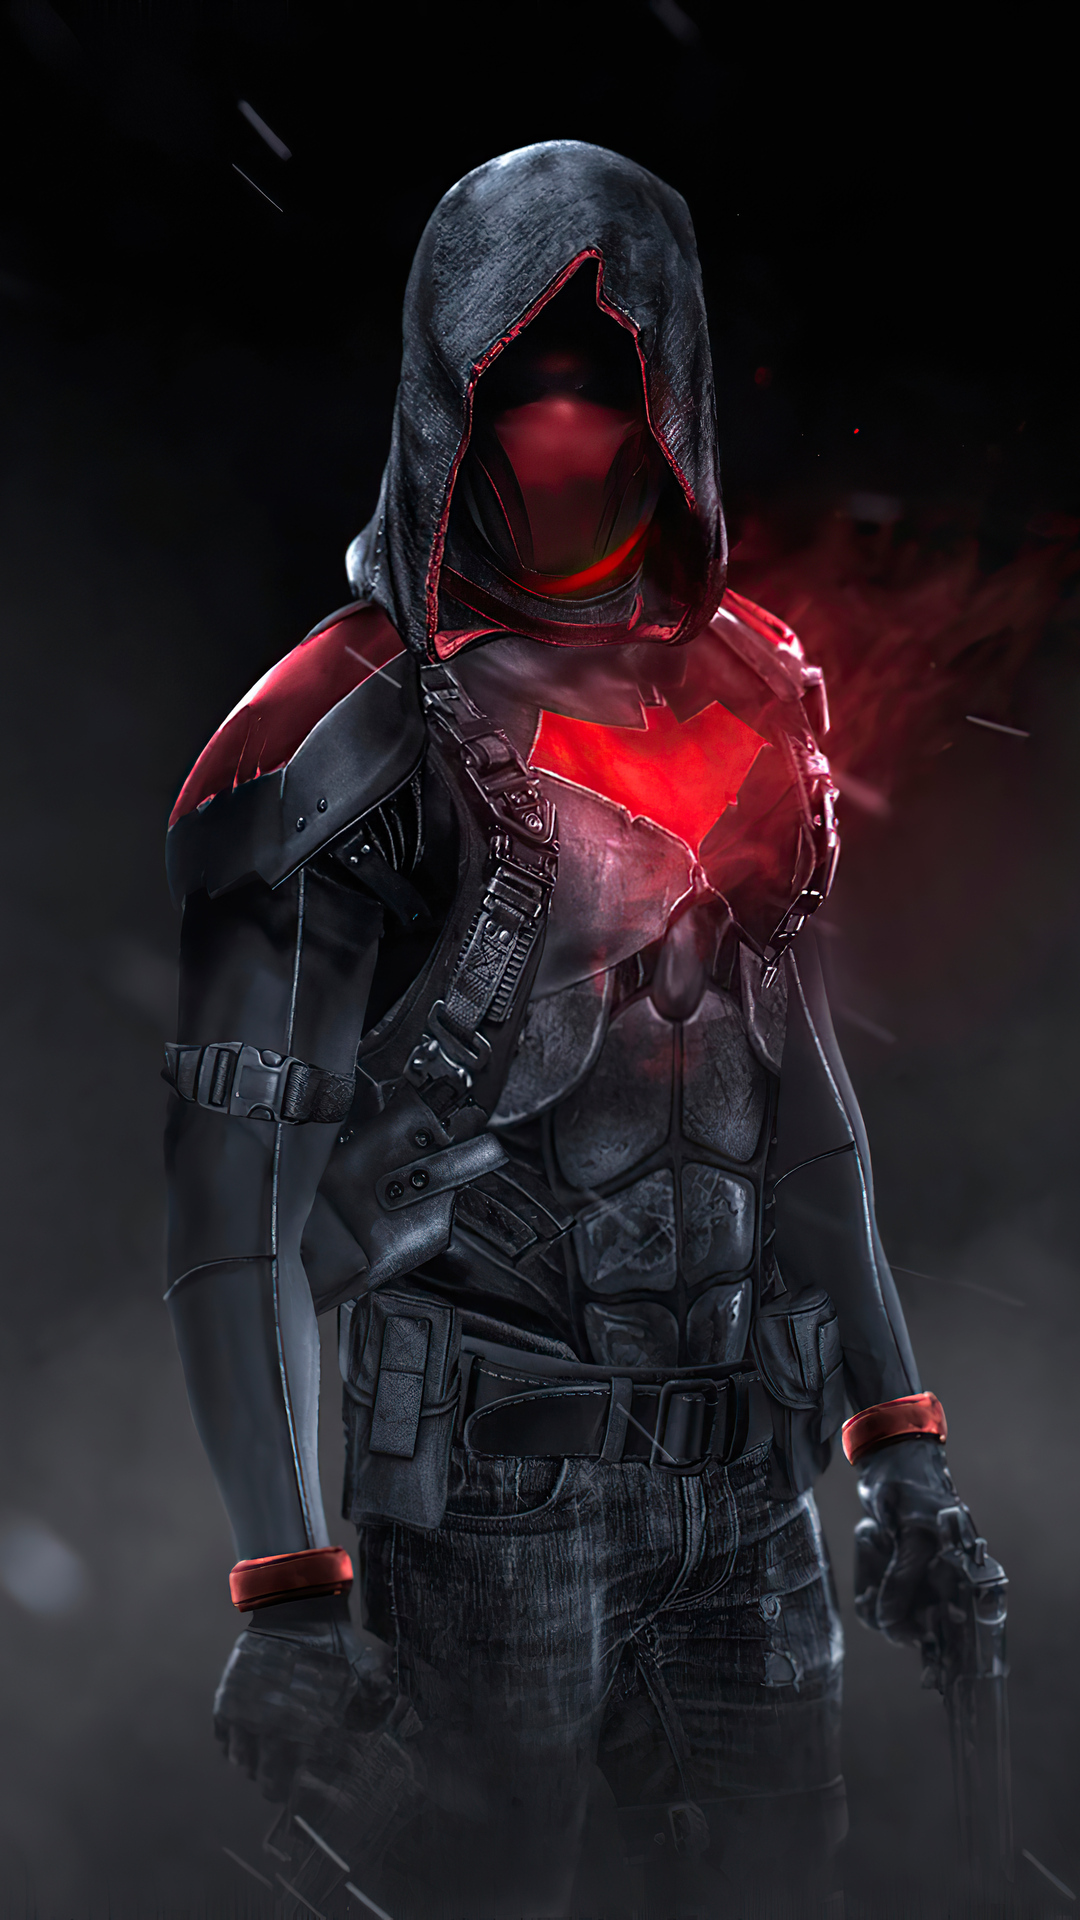 Red Hood With Gun IPhone Wallpaper  IPhone Wallpapers  iPhone Wallpapers